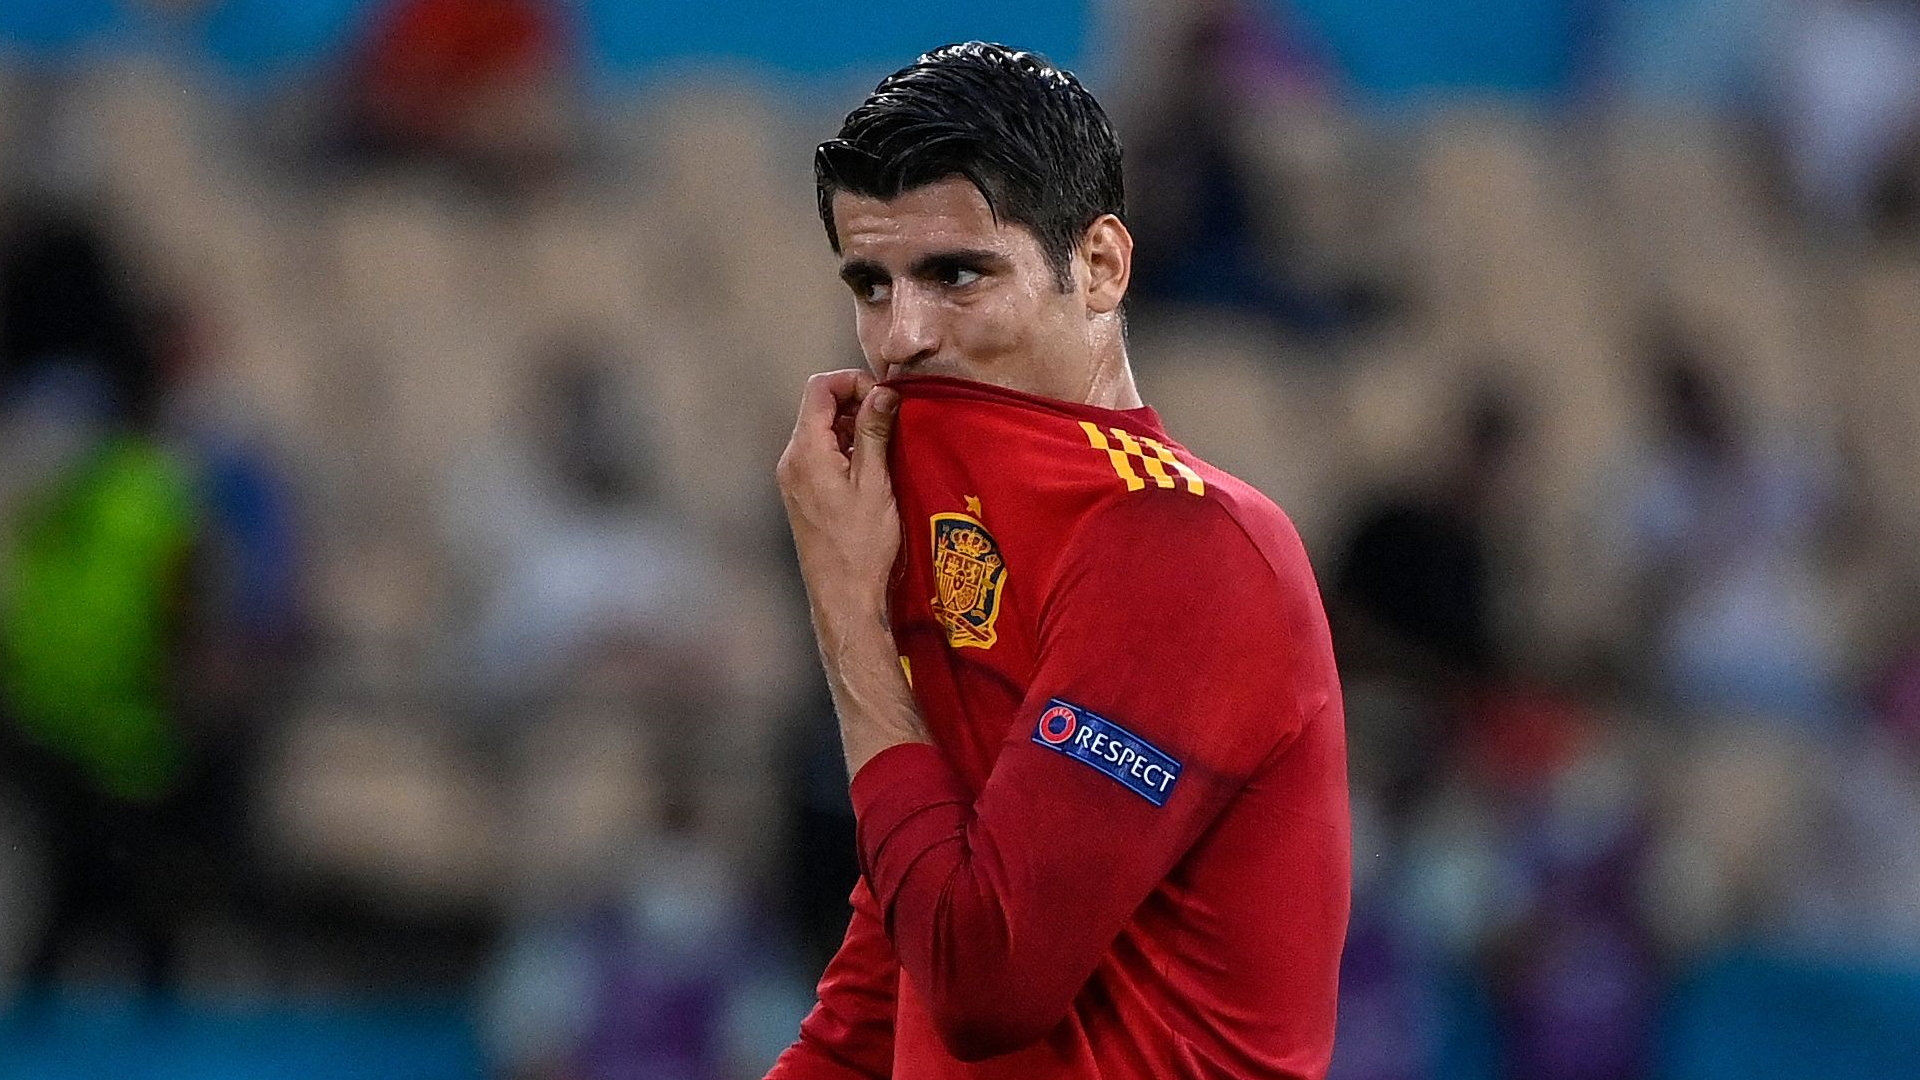 'I did not sleep for nine hours' - Morata received death threats against his family after Spain drew with Poland at Euro 2020